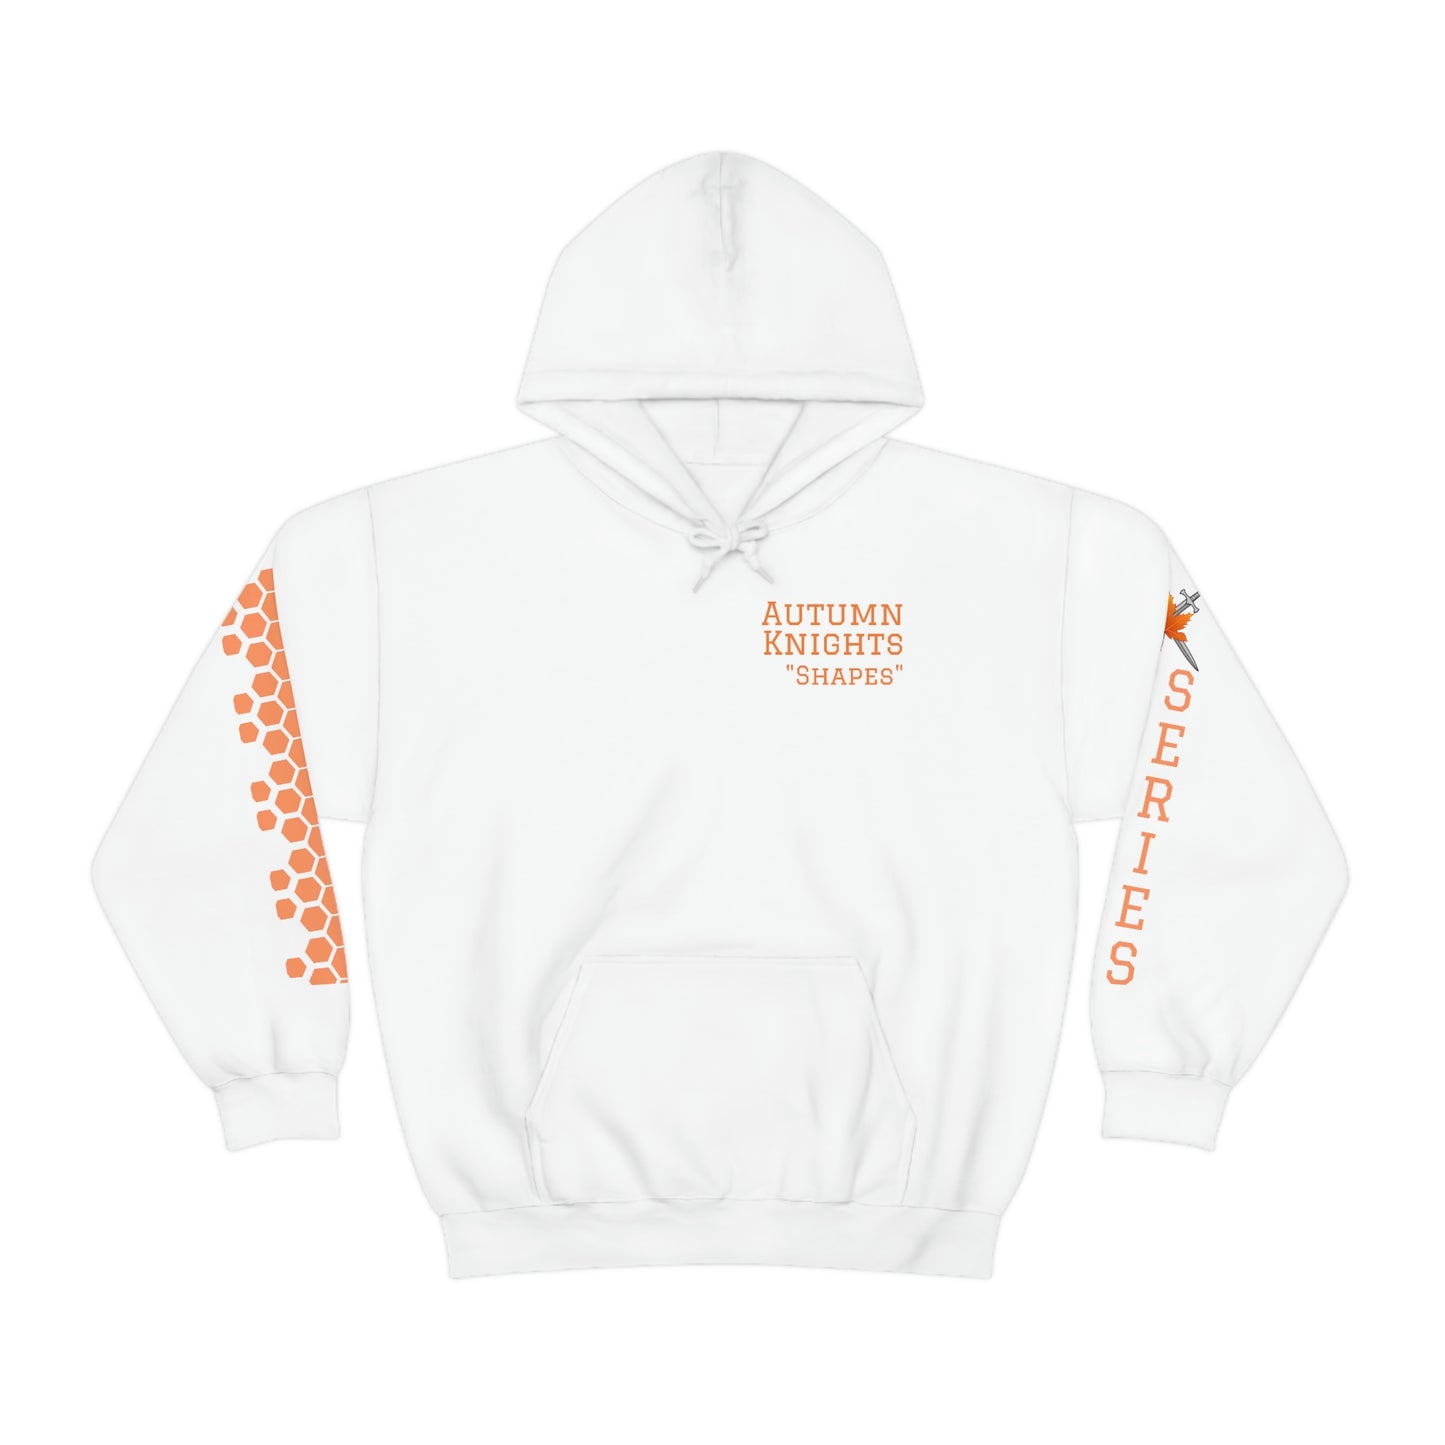 Autumn Knights - (2023 Series) Heavy Blended - Hooded Sweatshirt "Shapes"